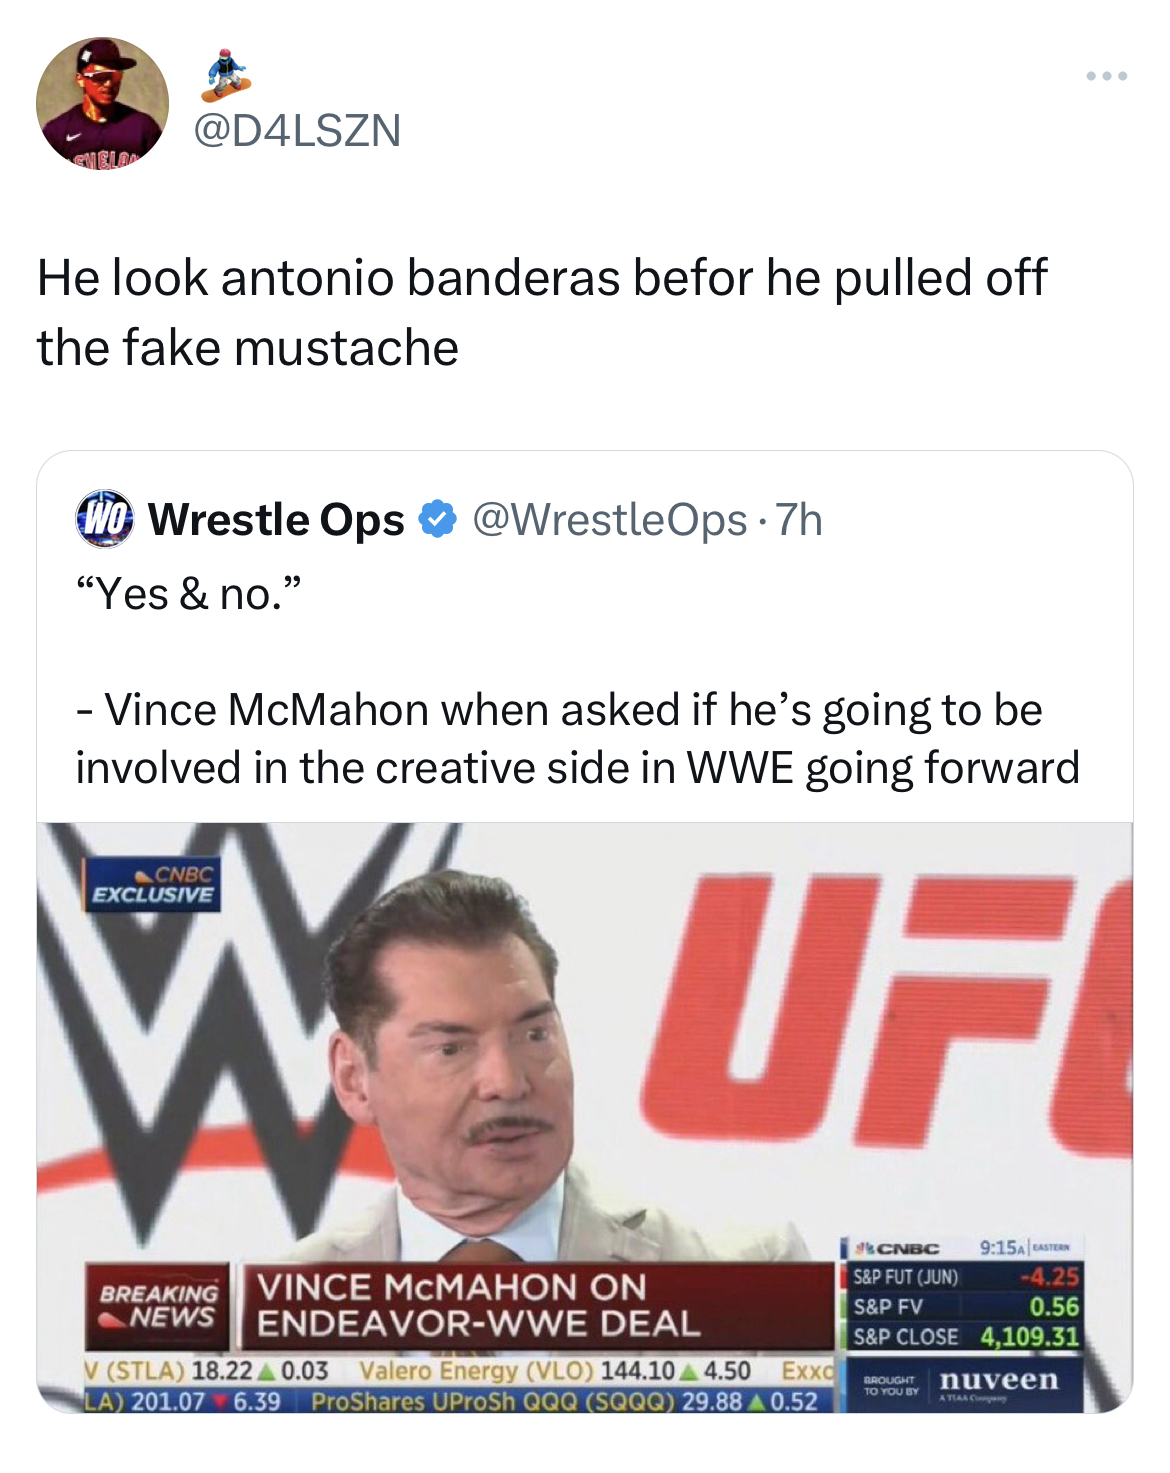 Vince McMahon Mustache memes - media - He look antonio banderas befor he pulled off the fake mustache Wo Wrestle Ops 7h "Yes & no." Vince McMahon when asked if he's going to be involved in the creative side in Wwe going forward Cnbc Exclusive W Uf Breakin